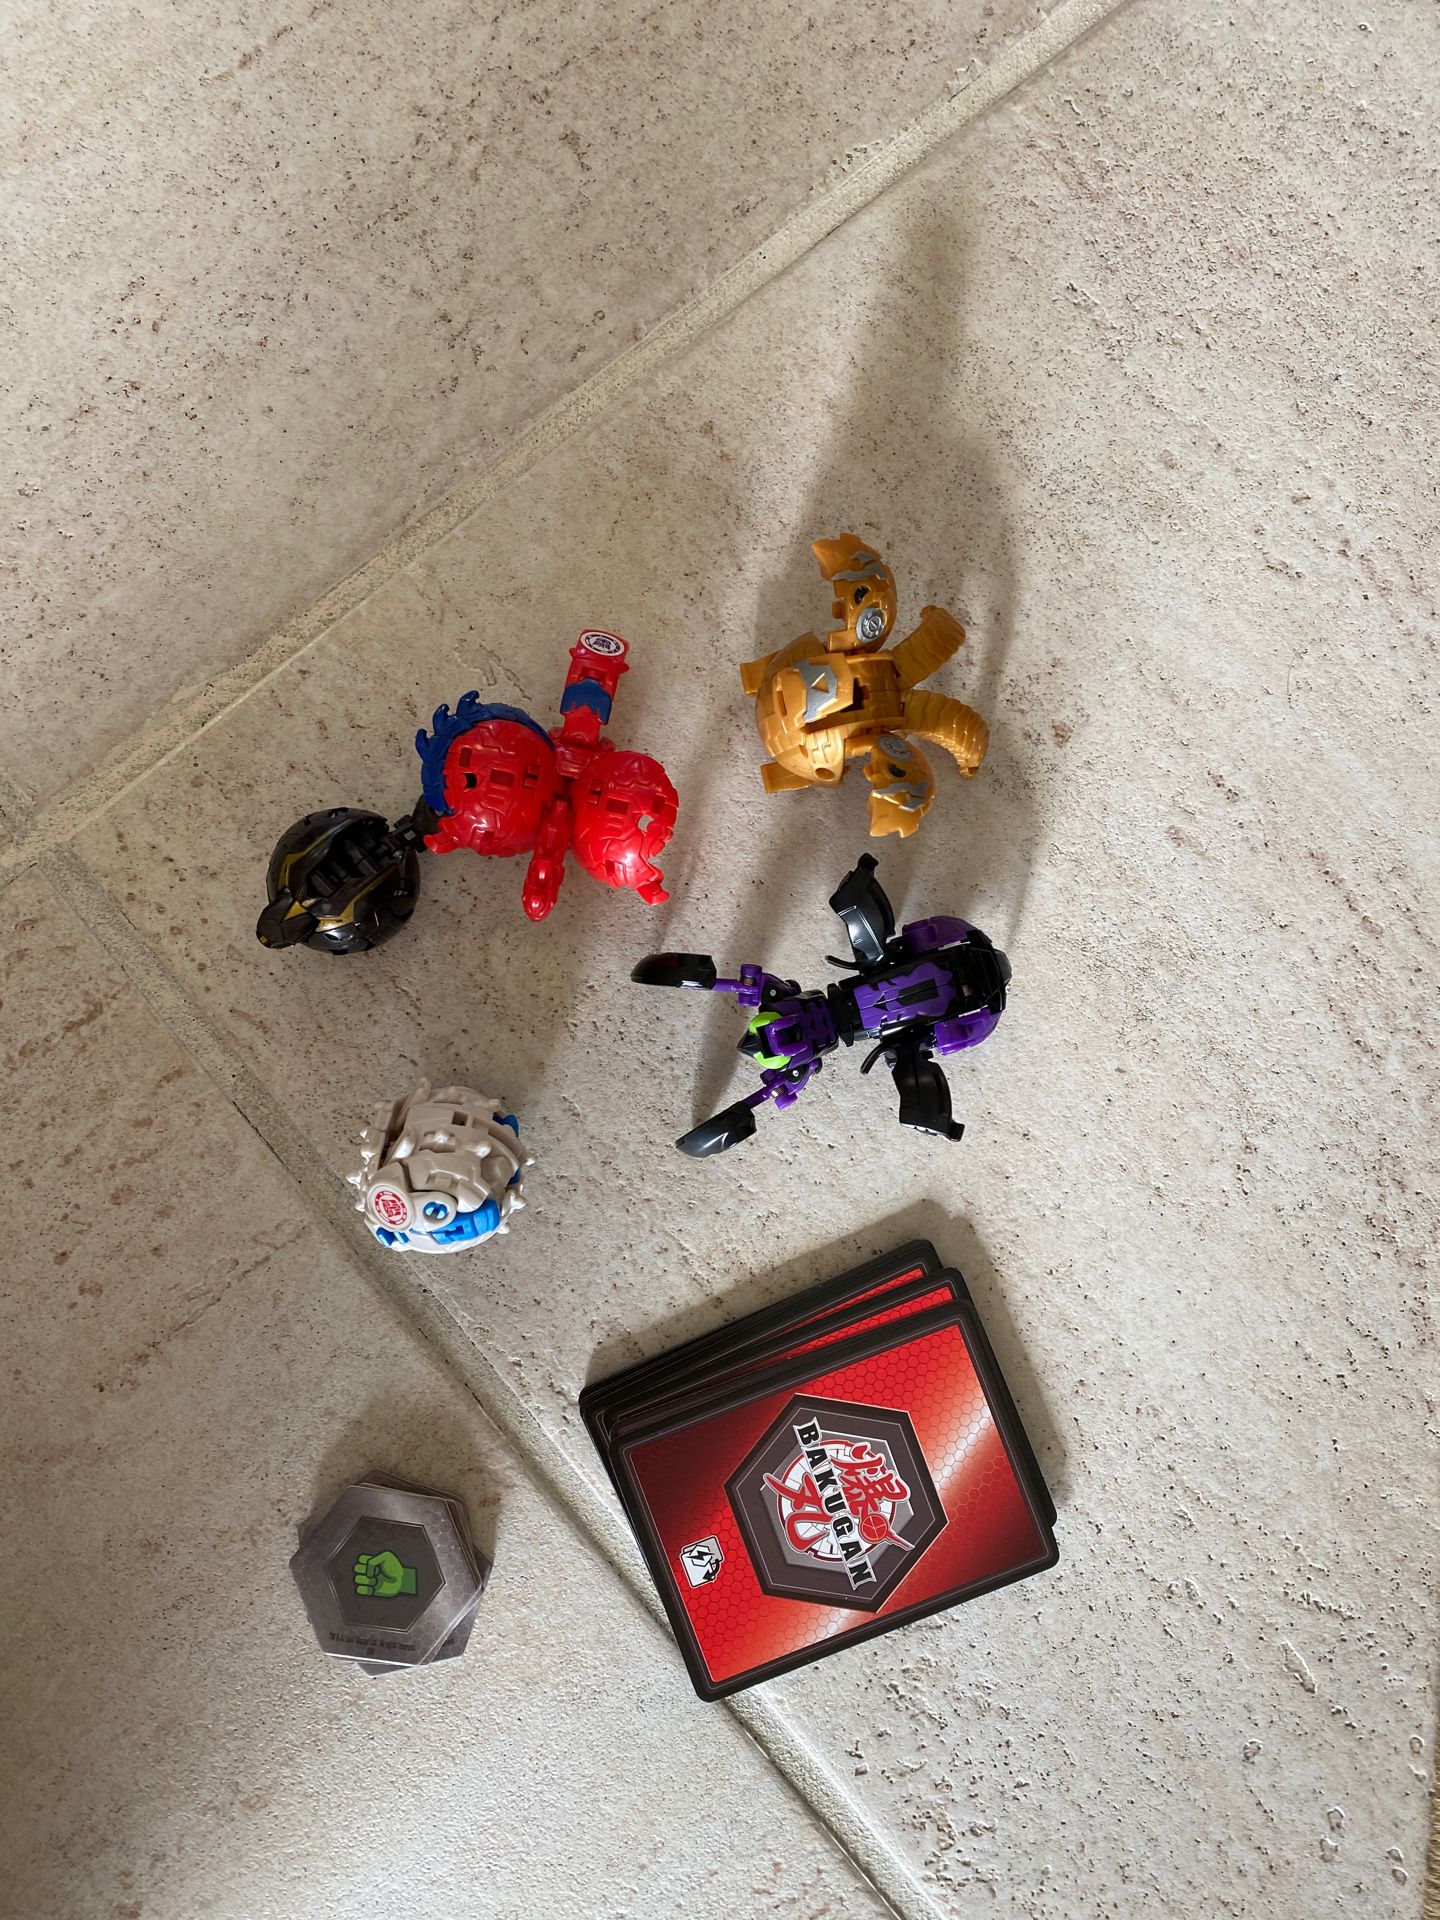 Bakugan toy and some cards